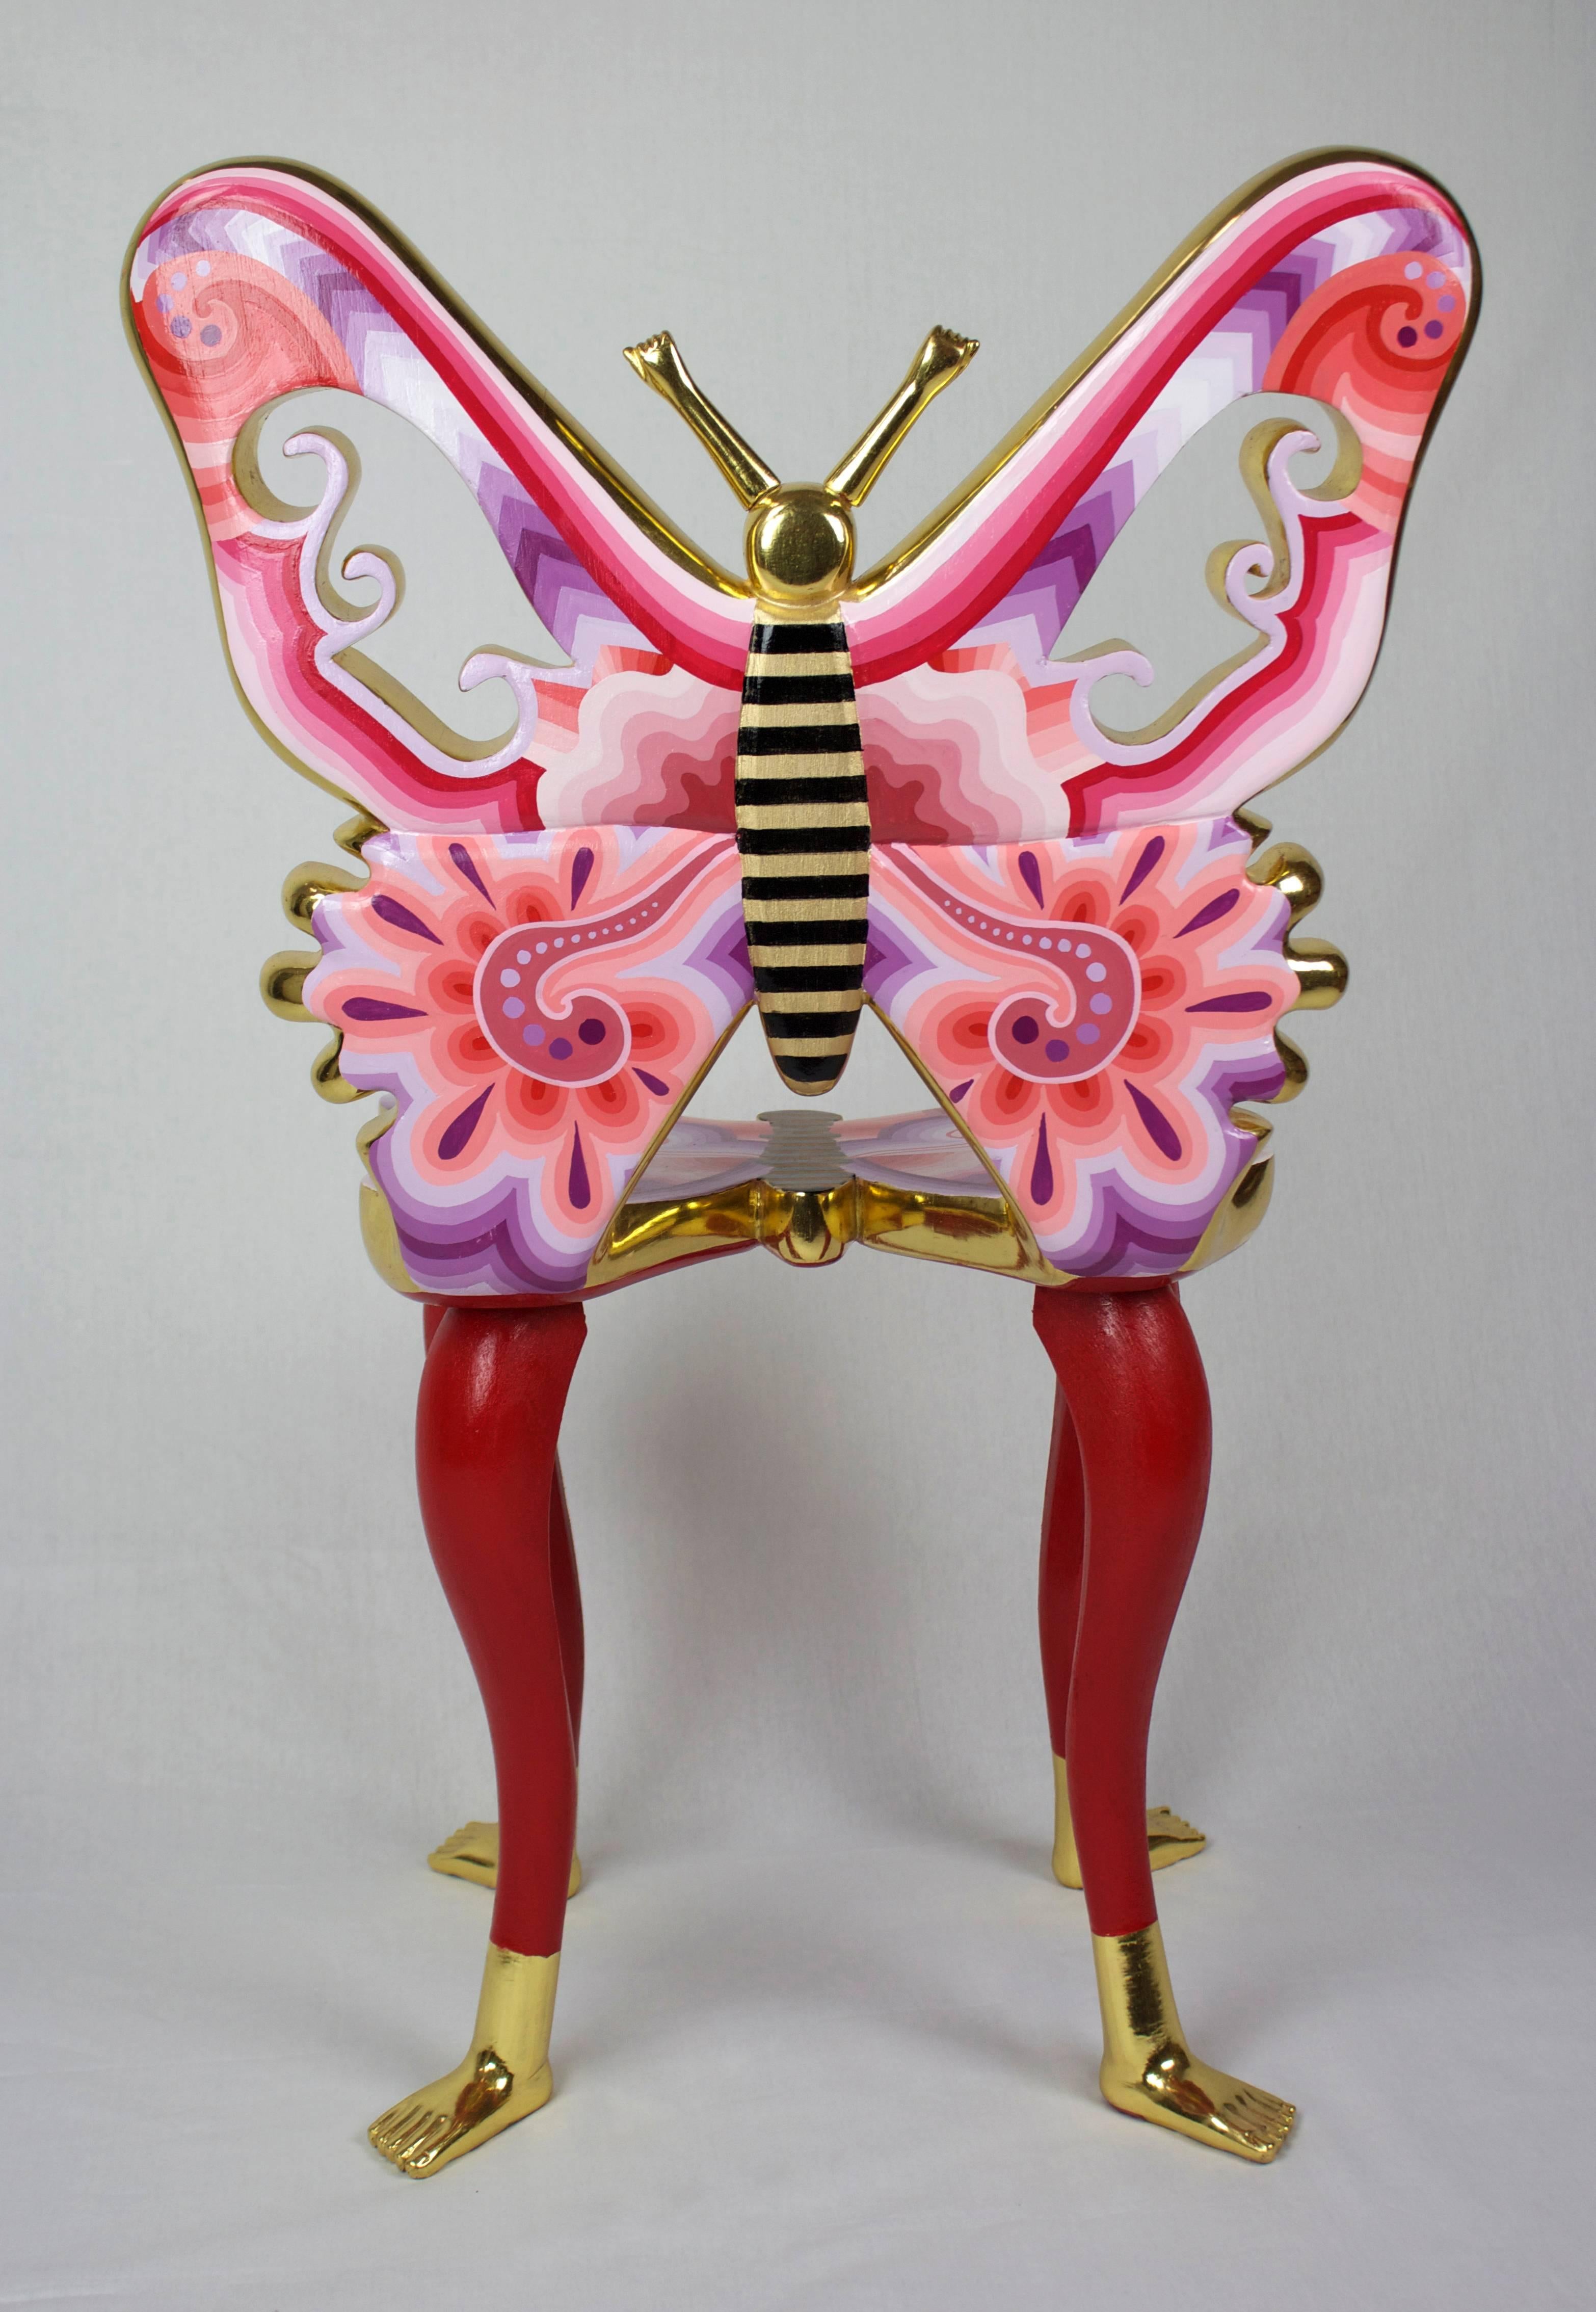 Butterfly Chair - Sculpture by Pedro Friedeberg